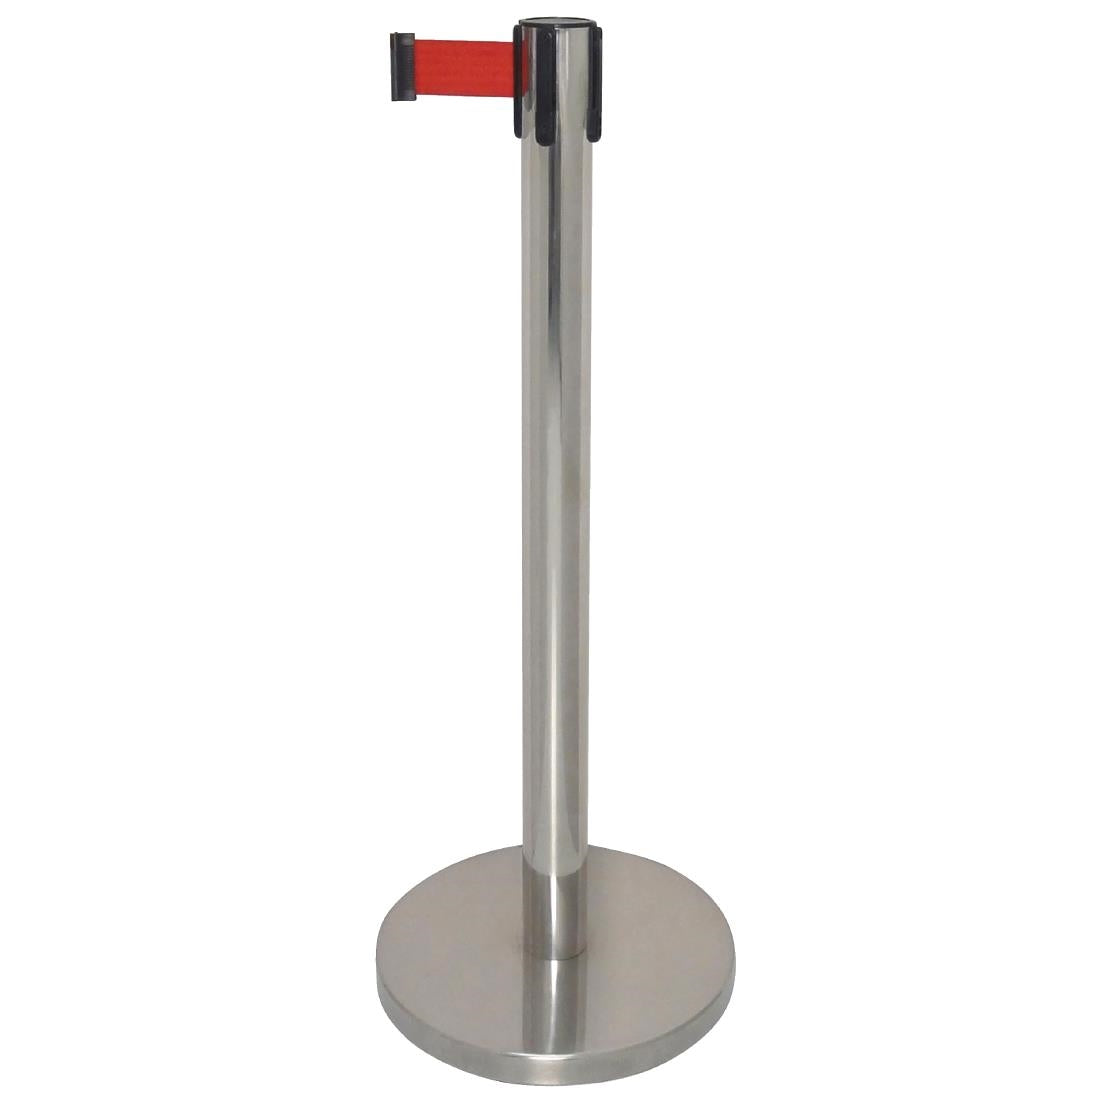 GG723 Bolero Polished Barrier with Red Strap JD Catering Equipment Solutions Ltd